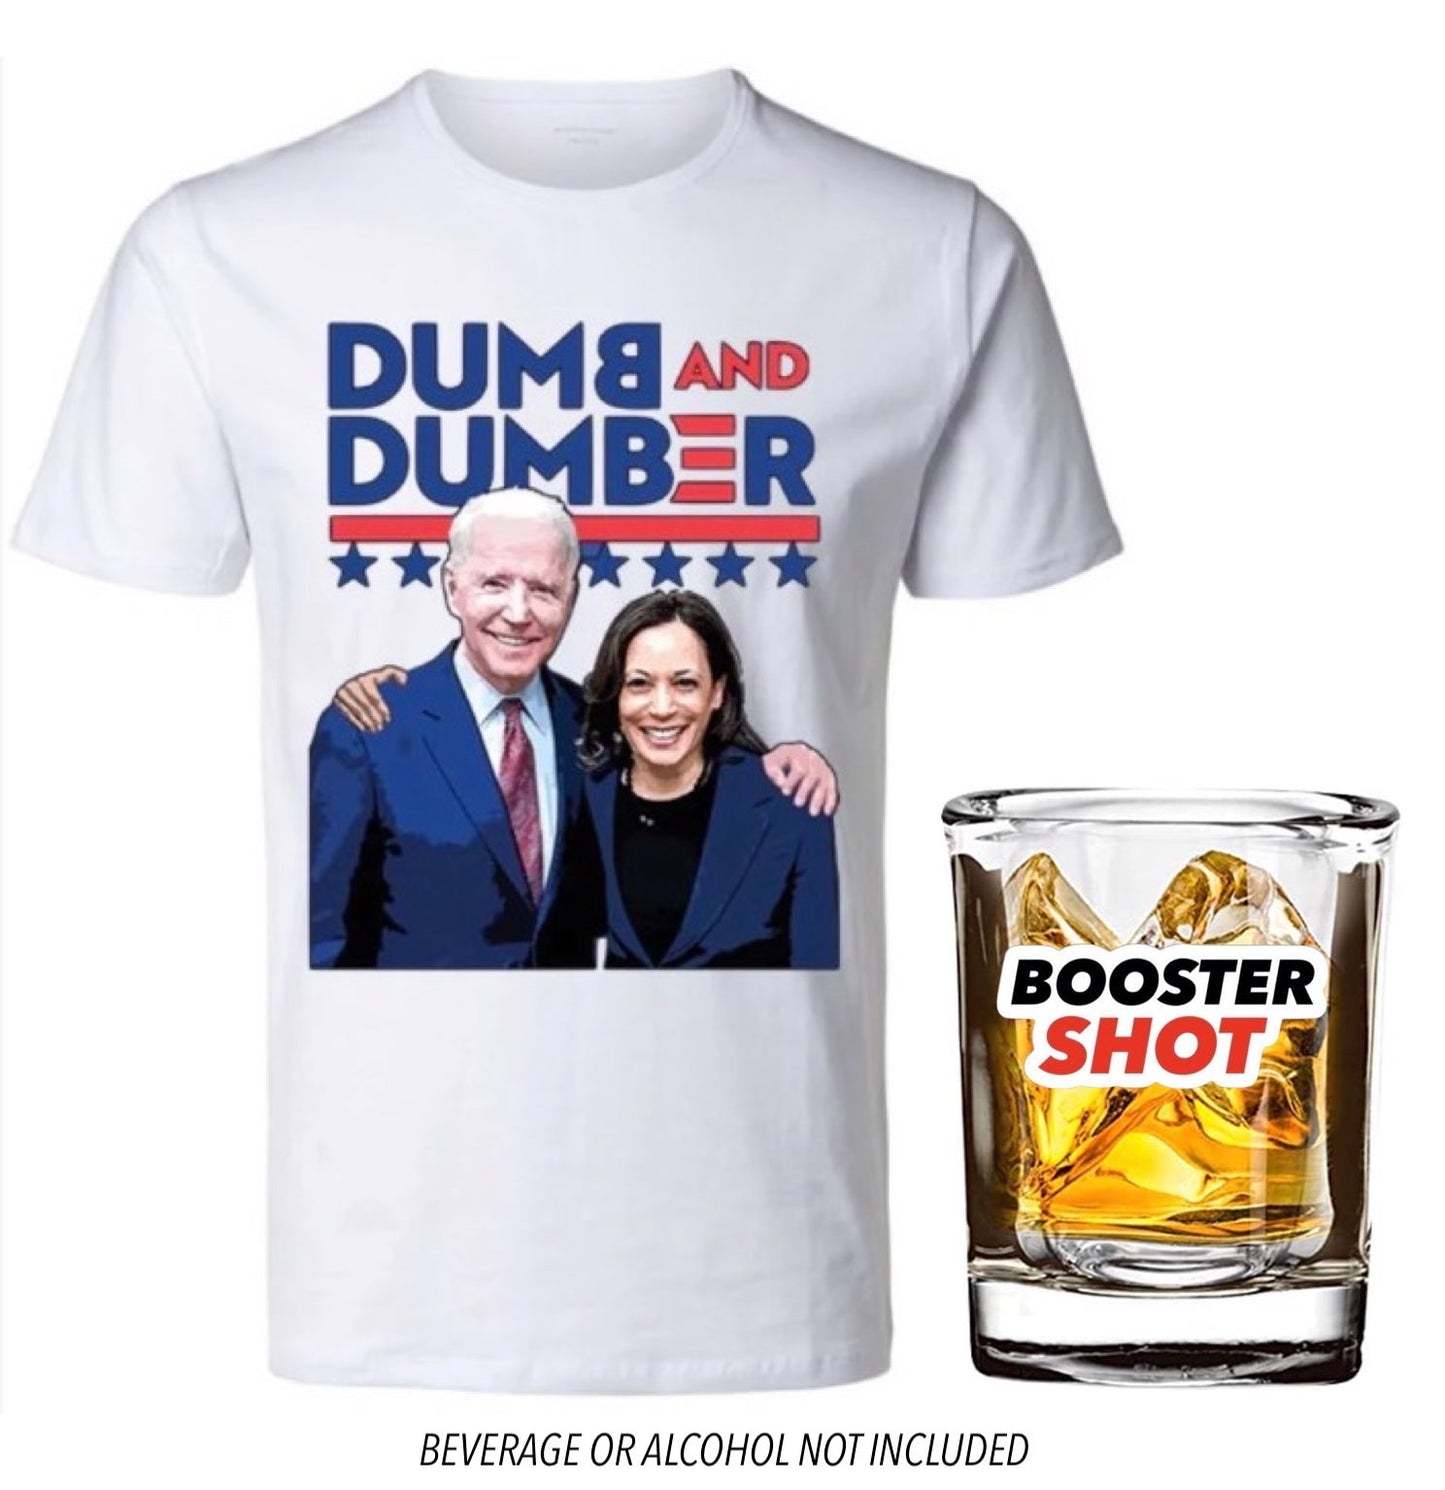 Dumb & Dumber (+FREE Booster, FREE Shipping!)